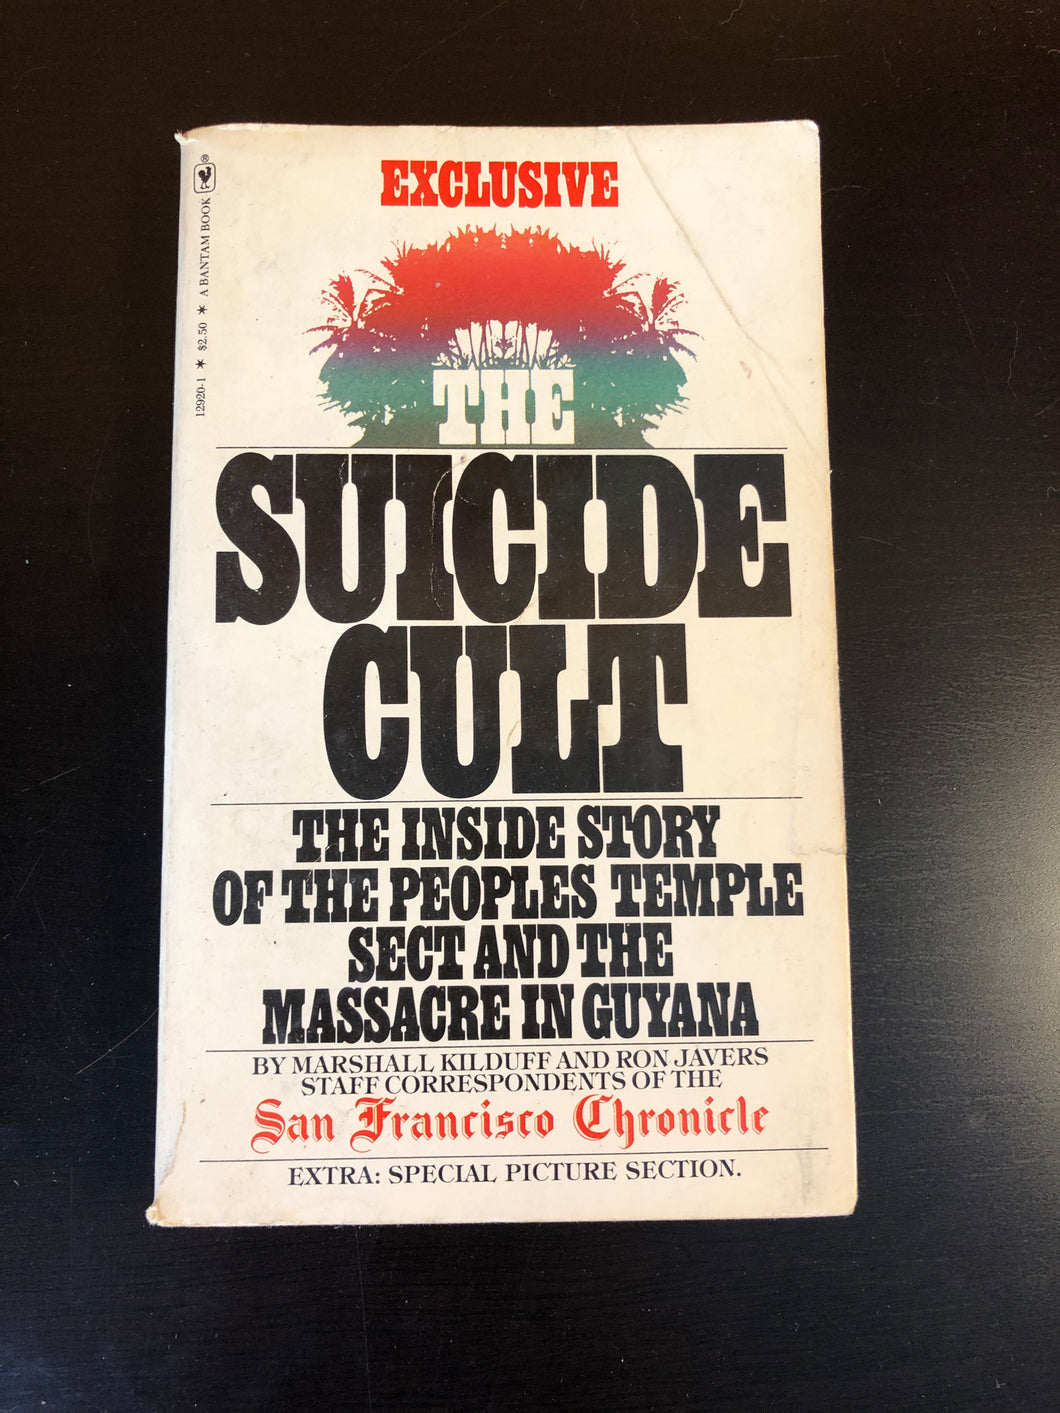 The Suicide Cult: The Inside Story of the Peoples Temple Sect and the Massacre in Guyana